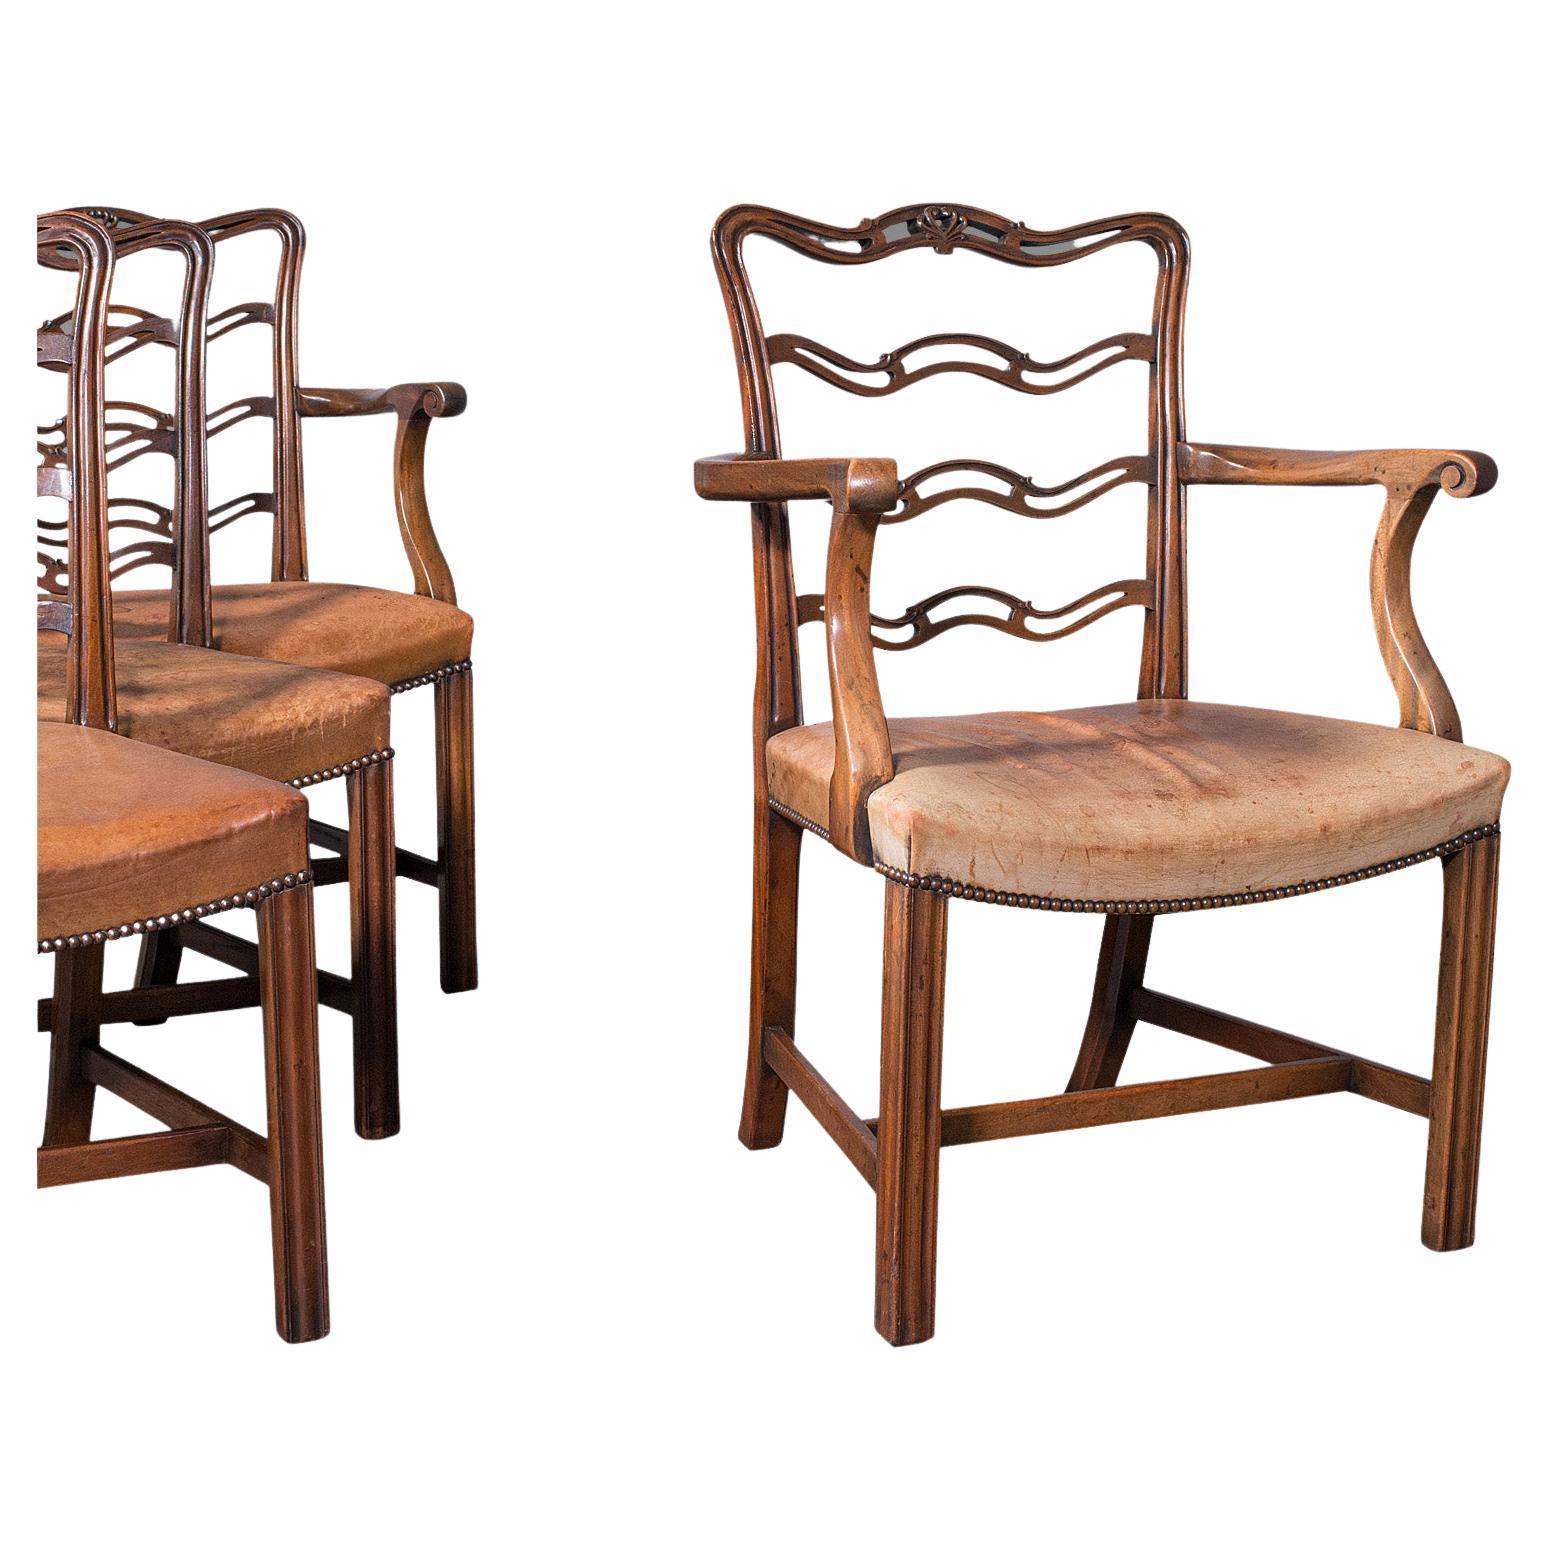 Set of 4 Vintage Ladder Back Chairs, Irish, Carver, Seat, Art Deco, Circa 1940 For Sale 7